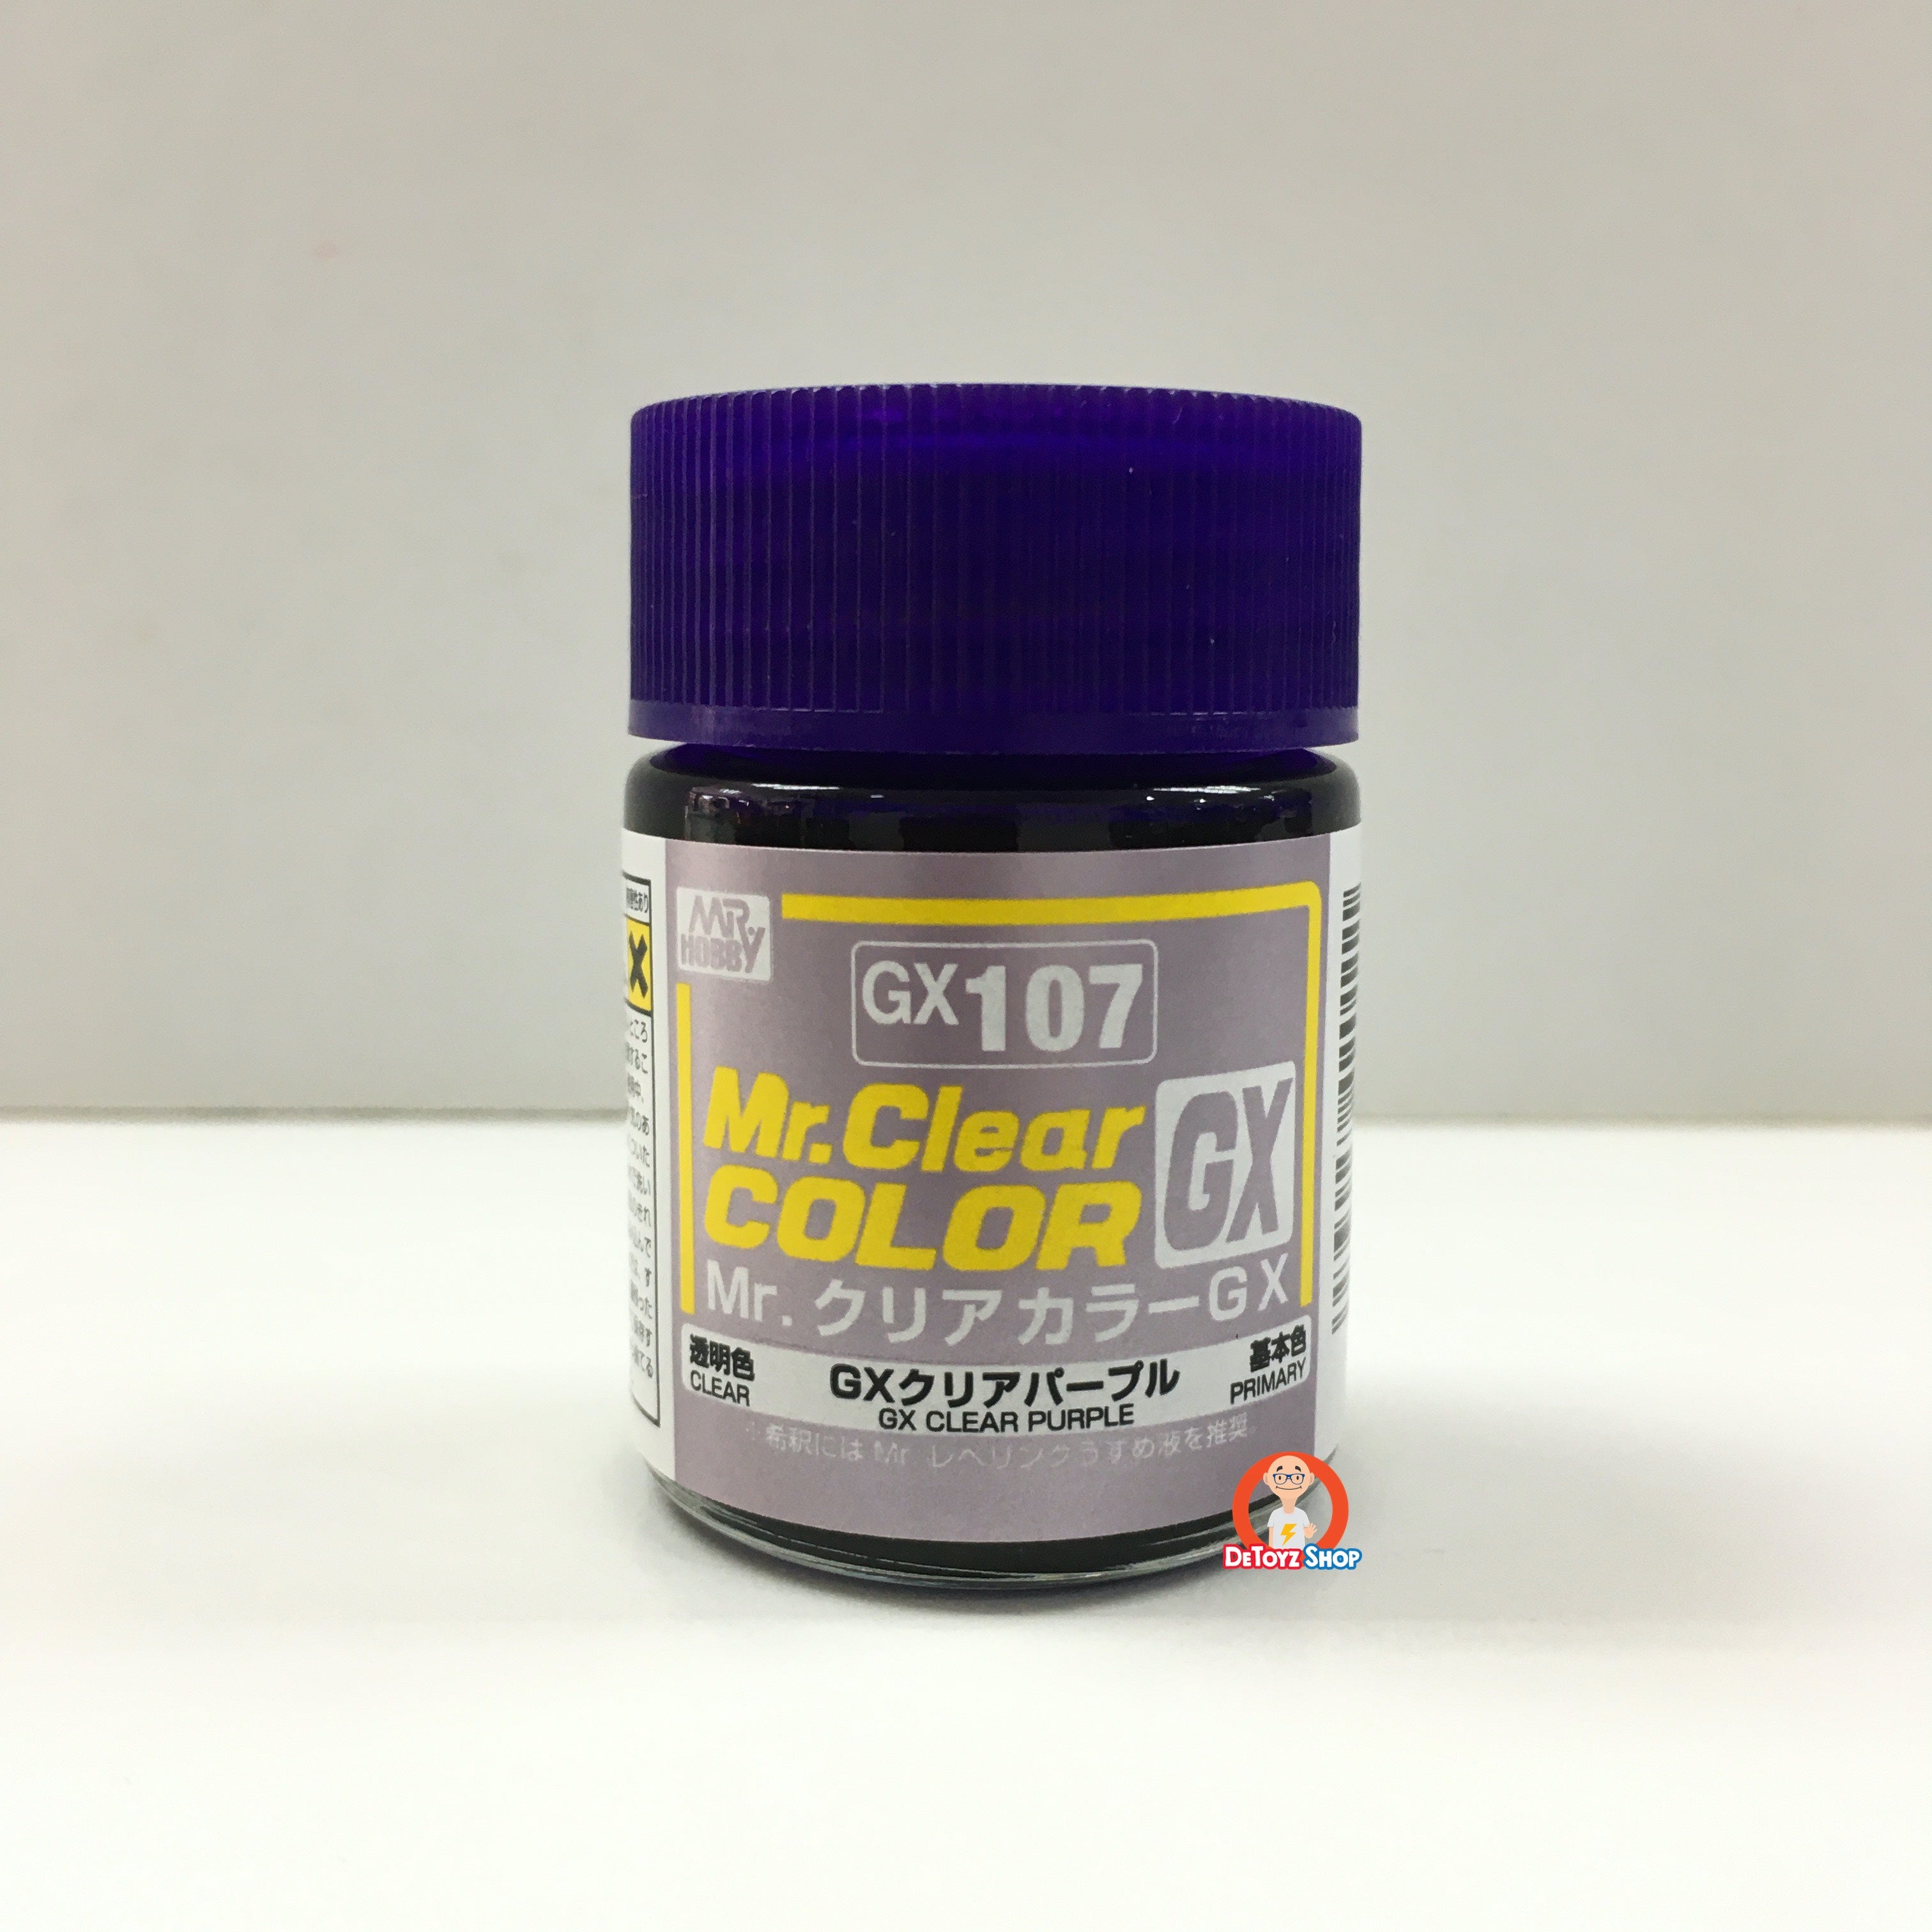 Mr Clear Color GX107 Clear Purple (18ml)